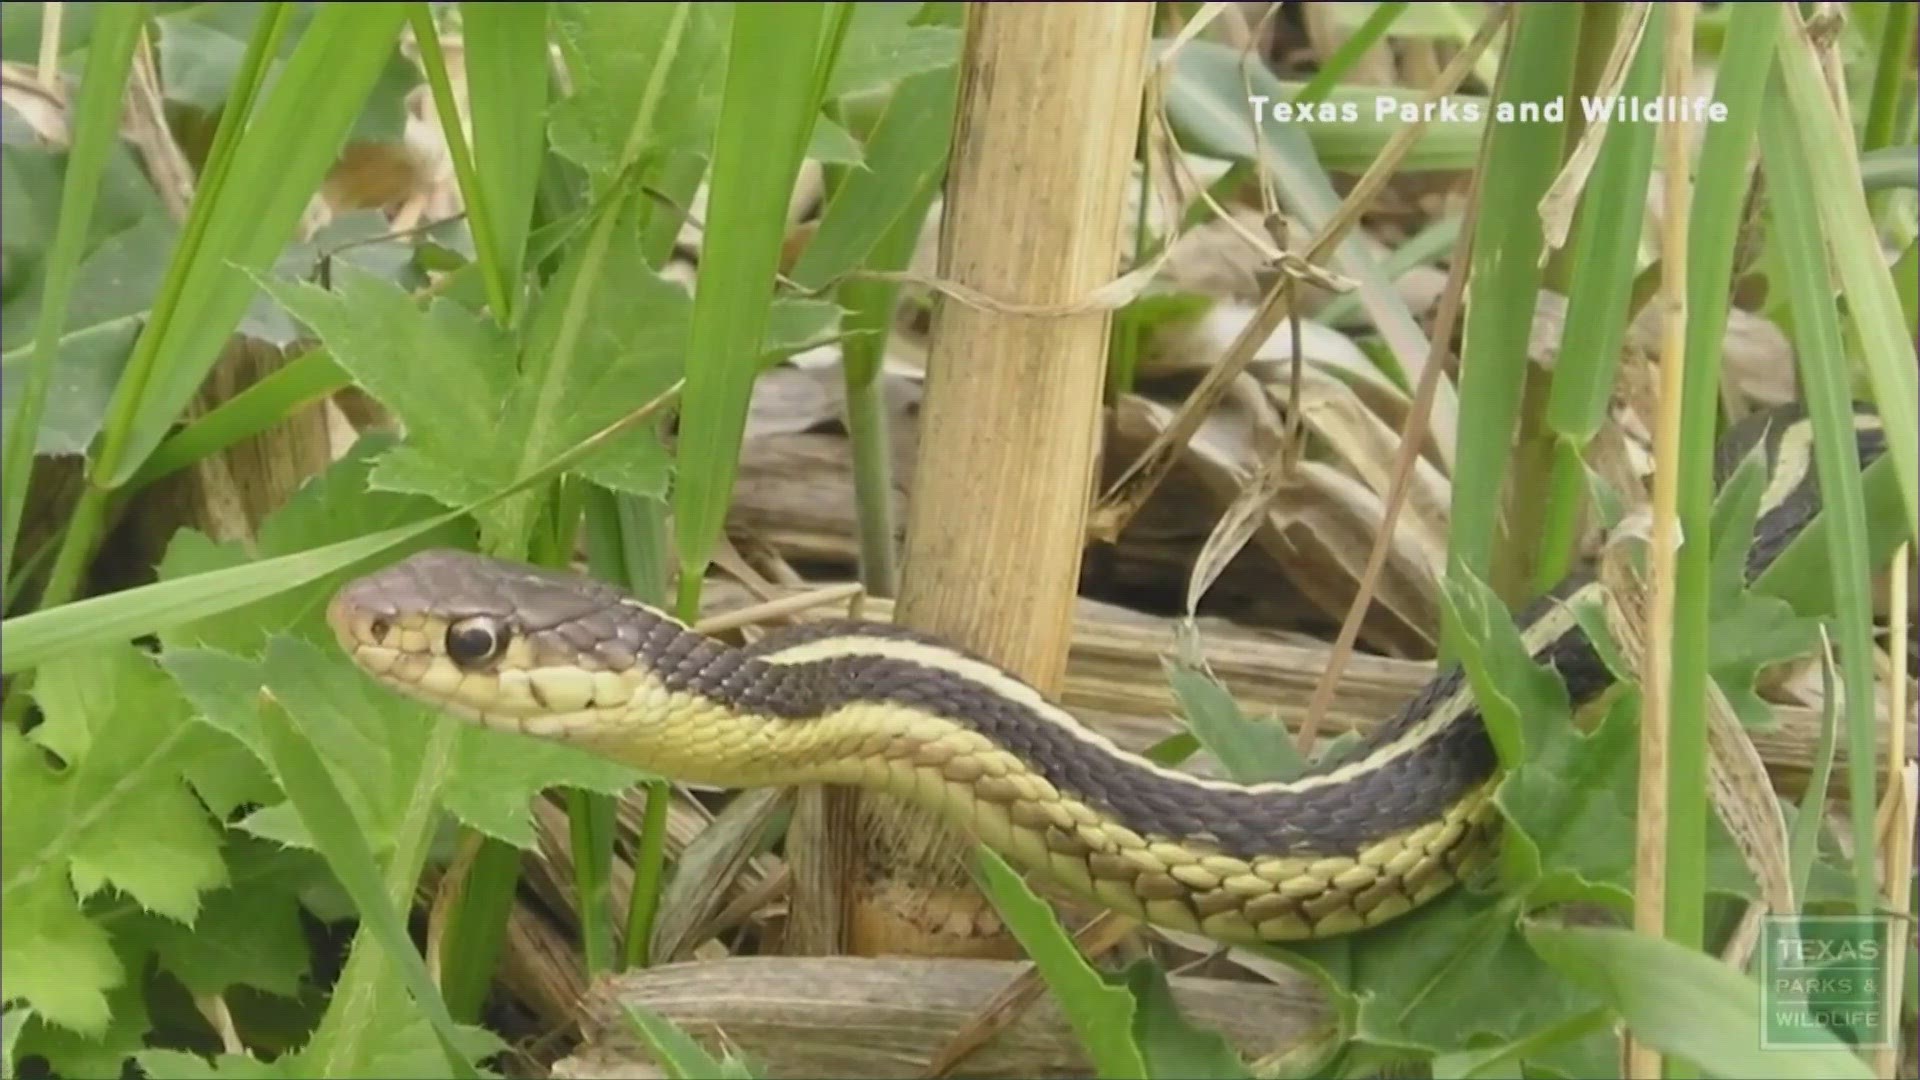 Anyone wanting to take annual bluebonnet photos outside is asked to watch out for snakes.